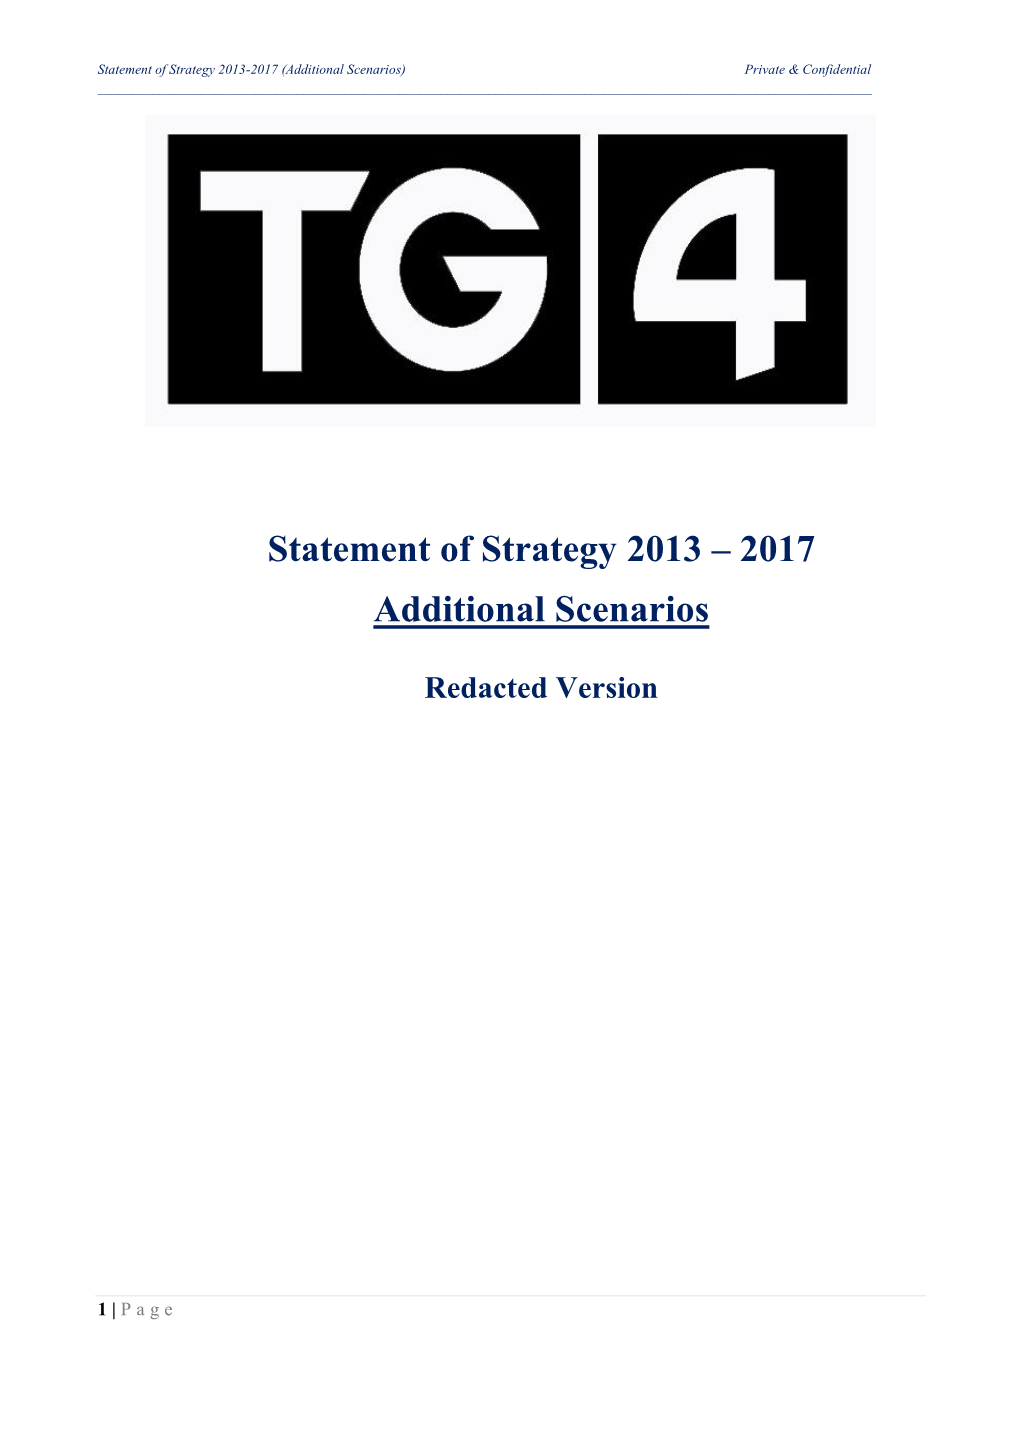 Statement of Strategy 2013 – 2017 Additional Scenarios